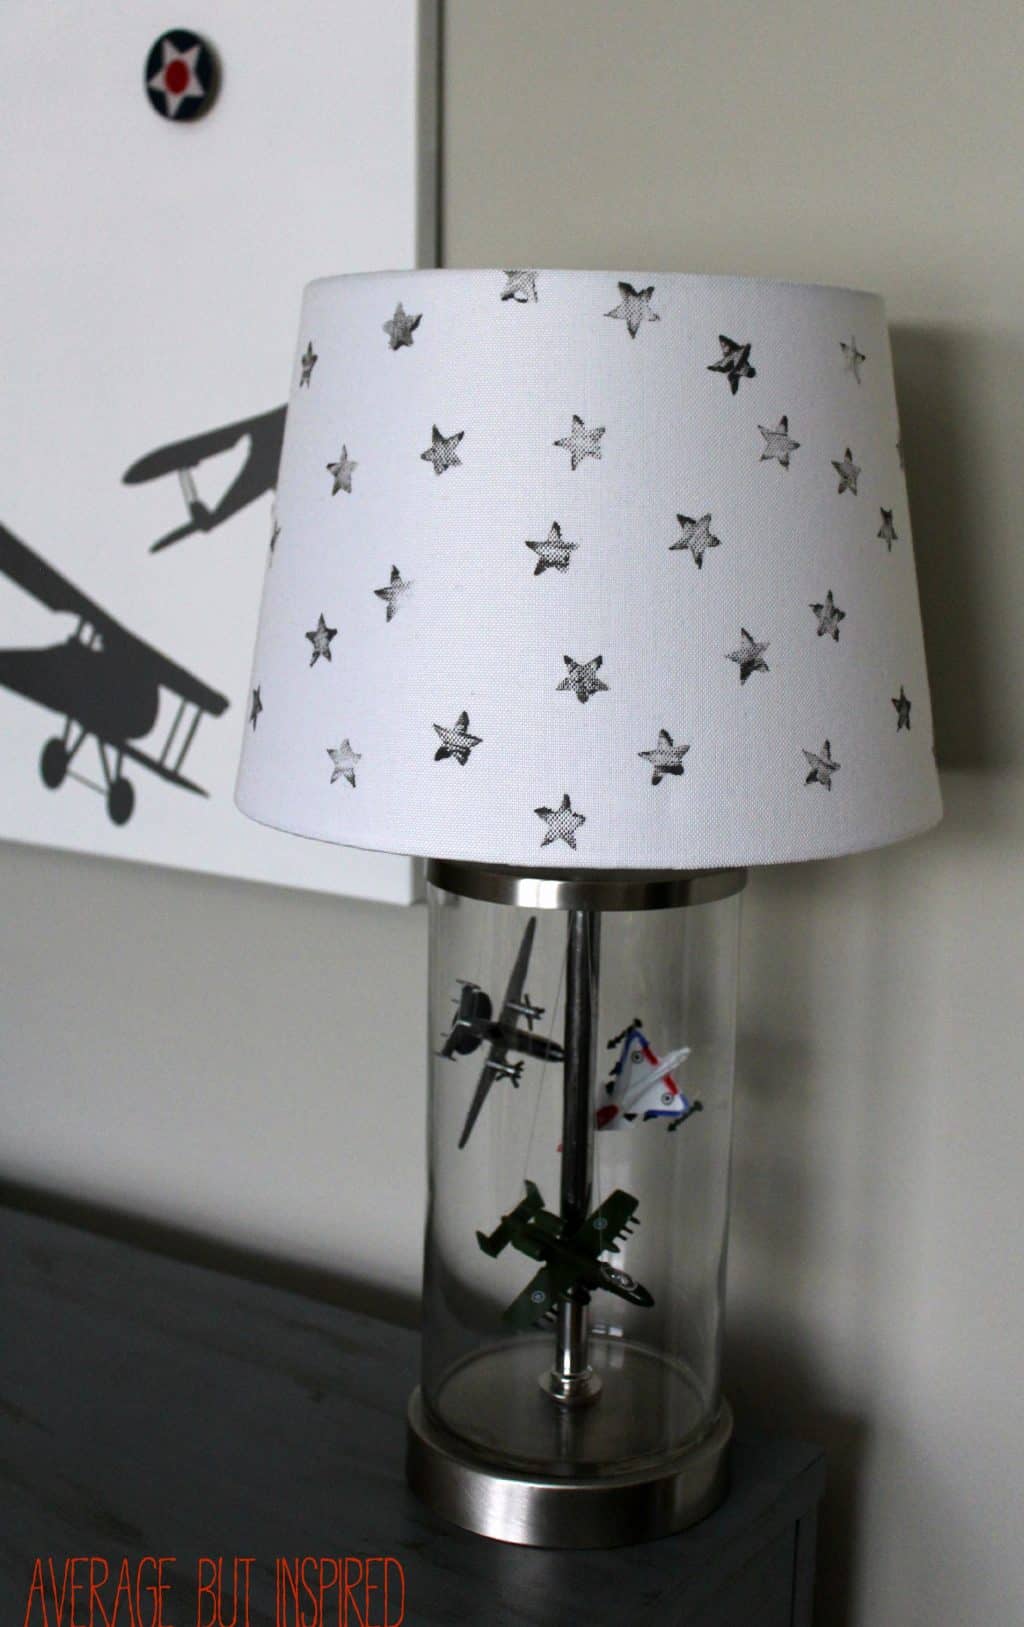 Lamp Filled with Soaring Airplanes